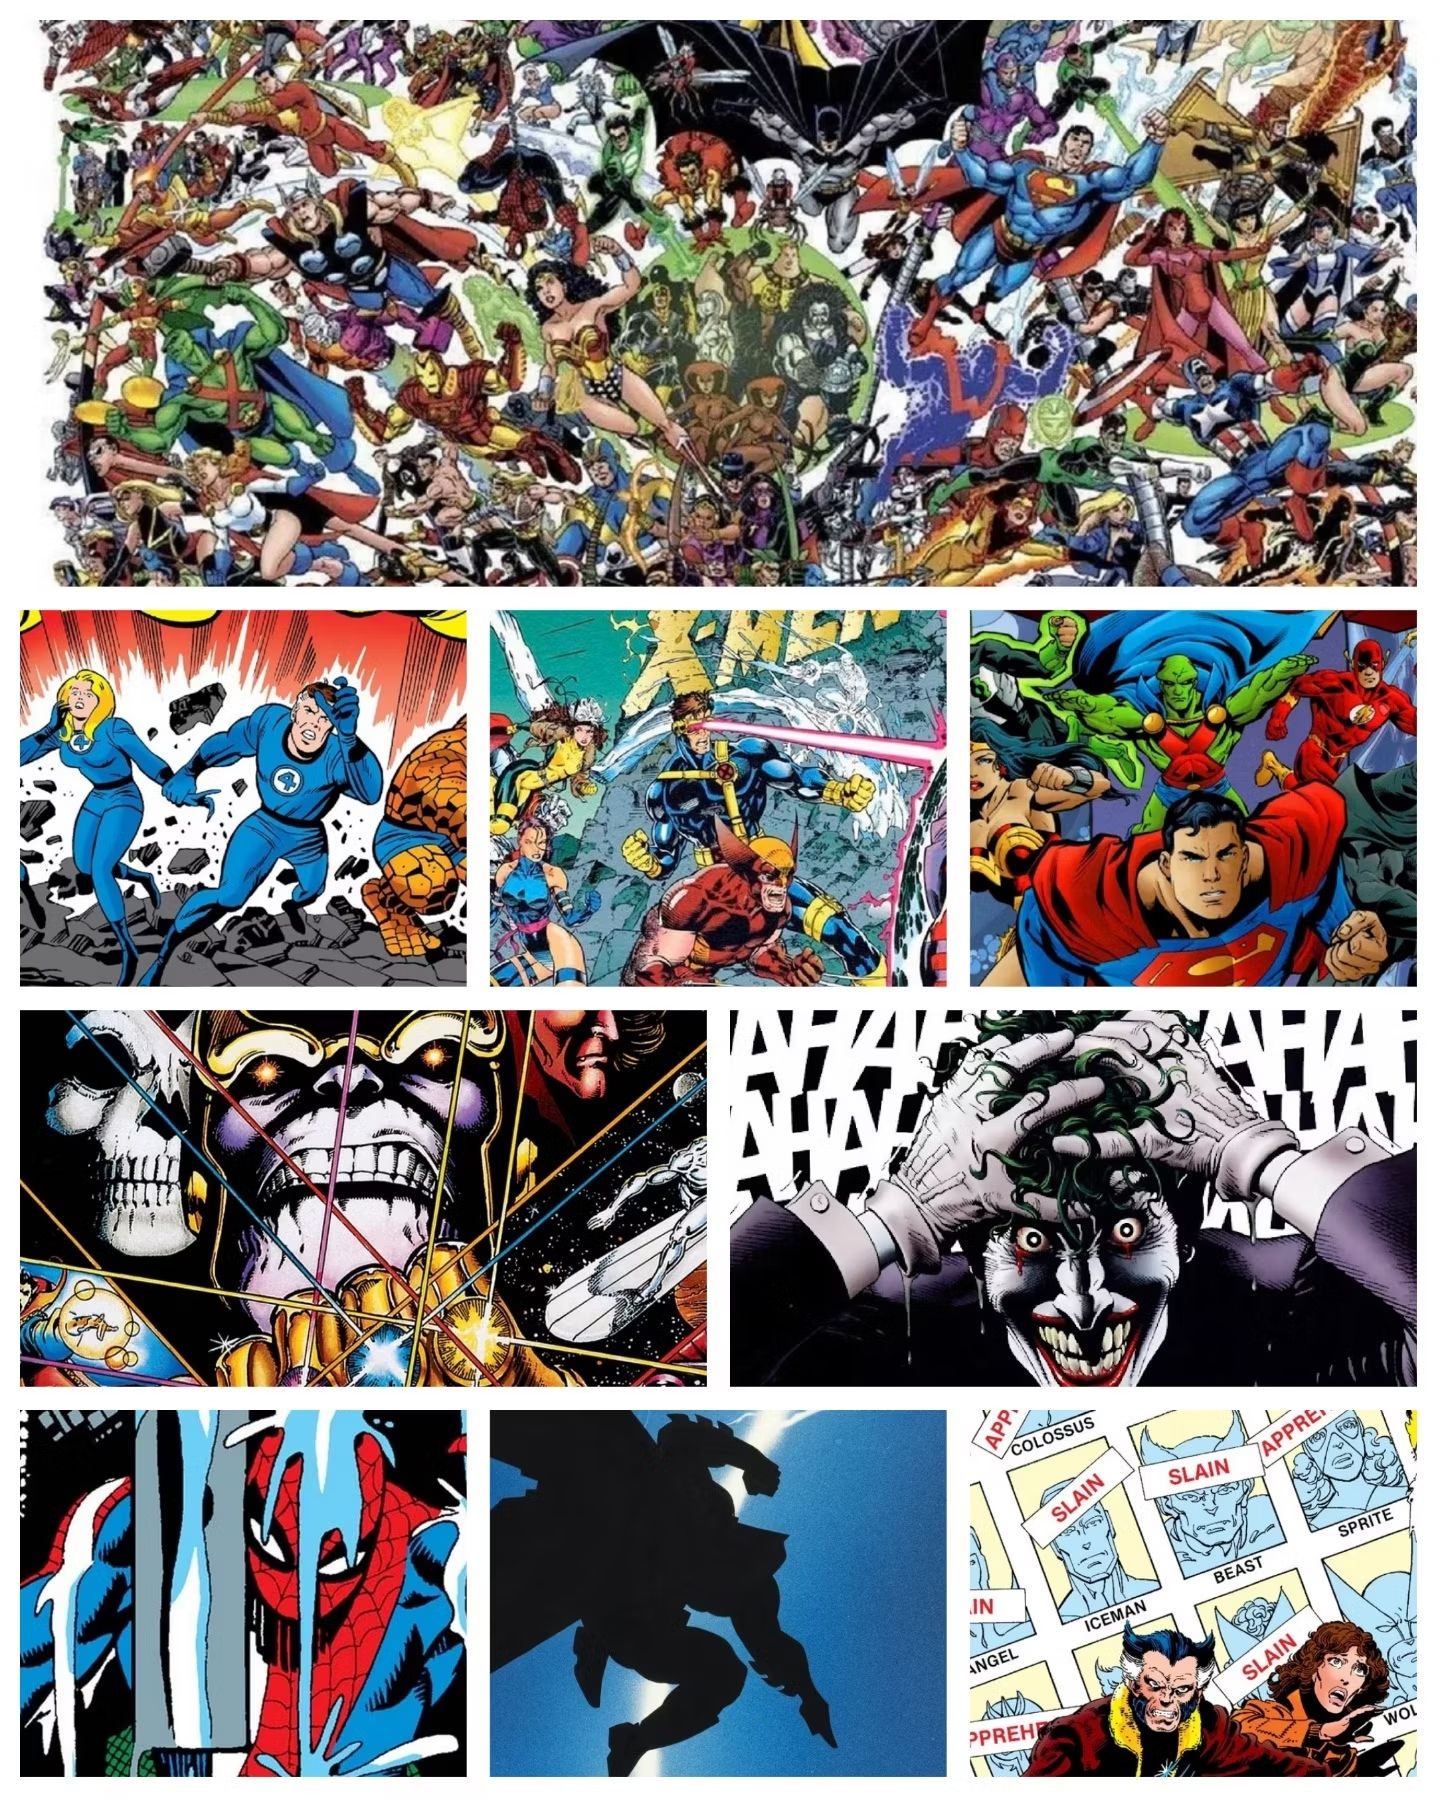 Collage of Marvel and DC comic book art